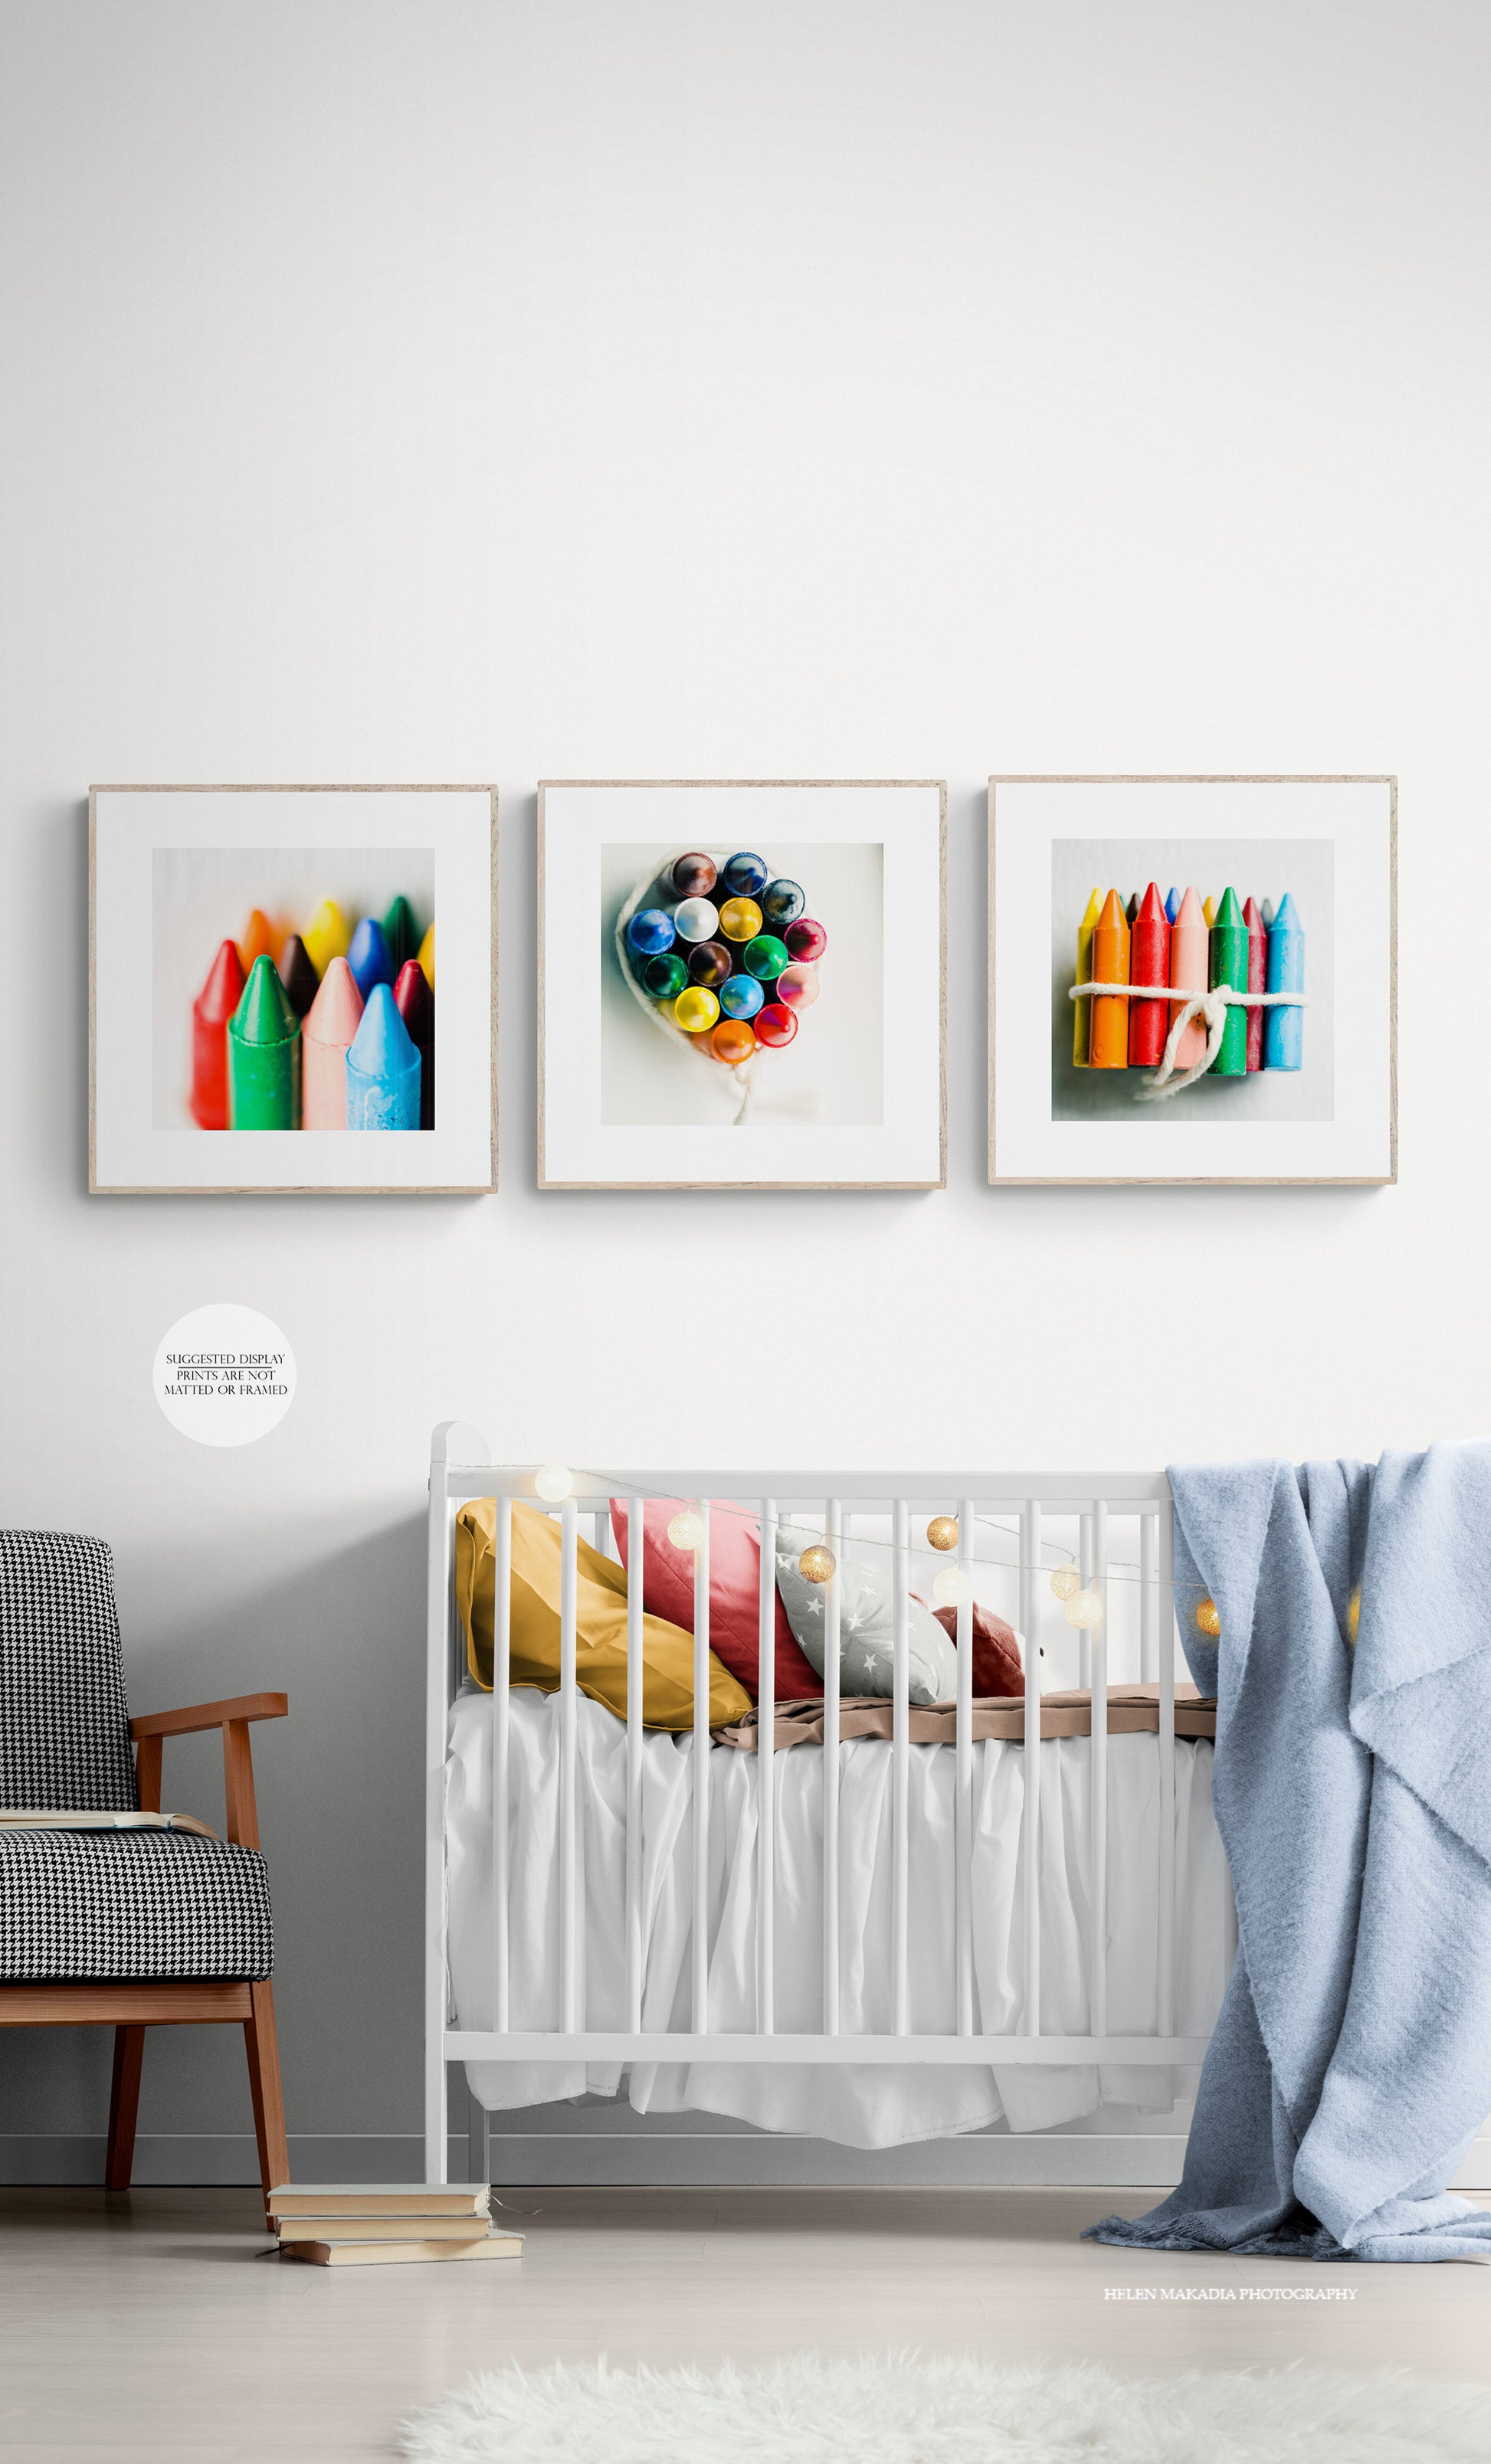 Set of 3 Photographs of a bundle of Crayons as Wall Art in a Nursery